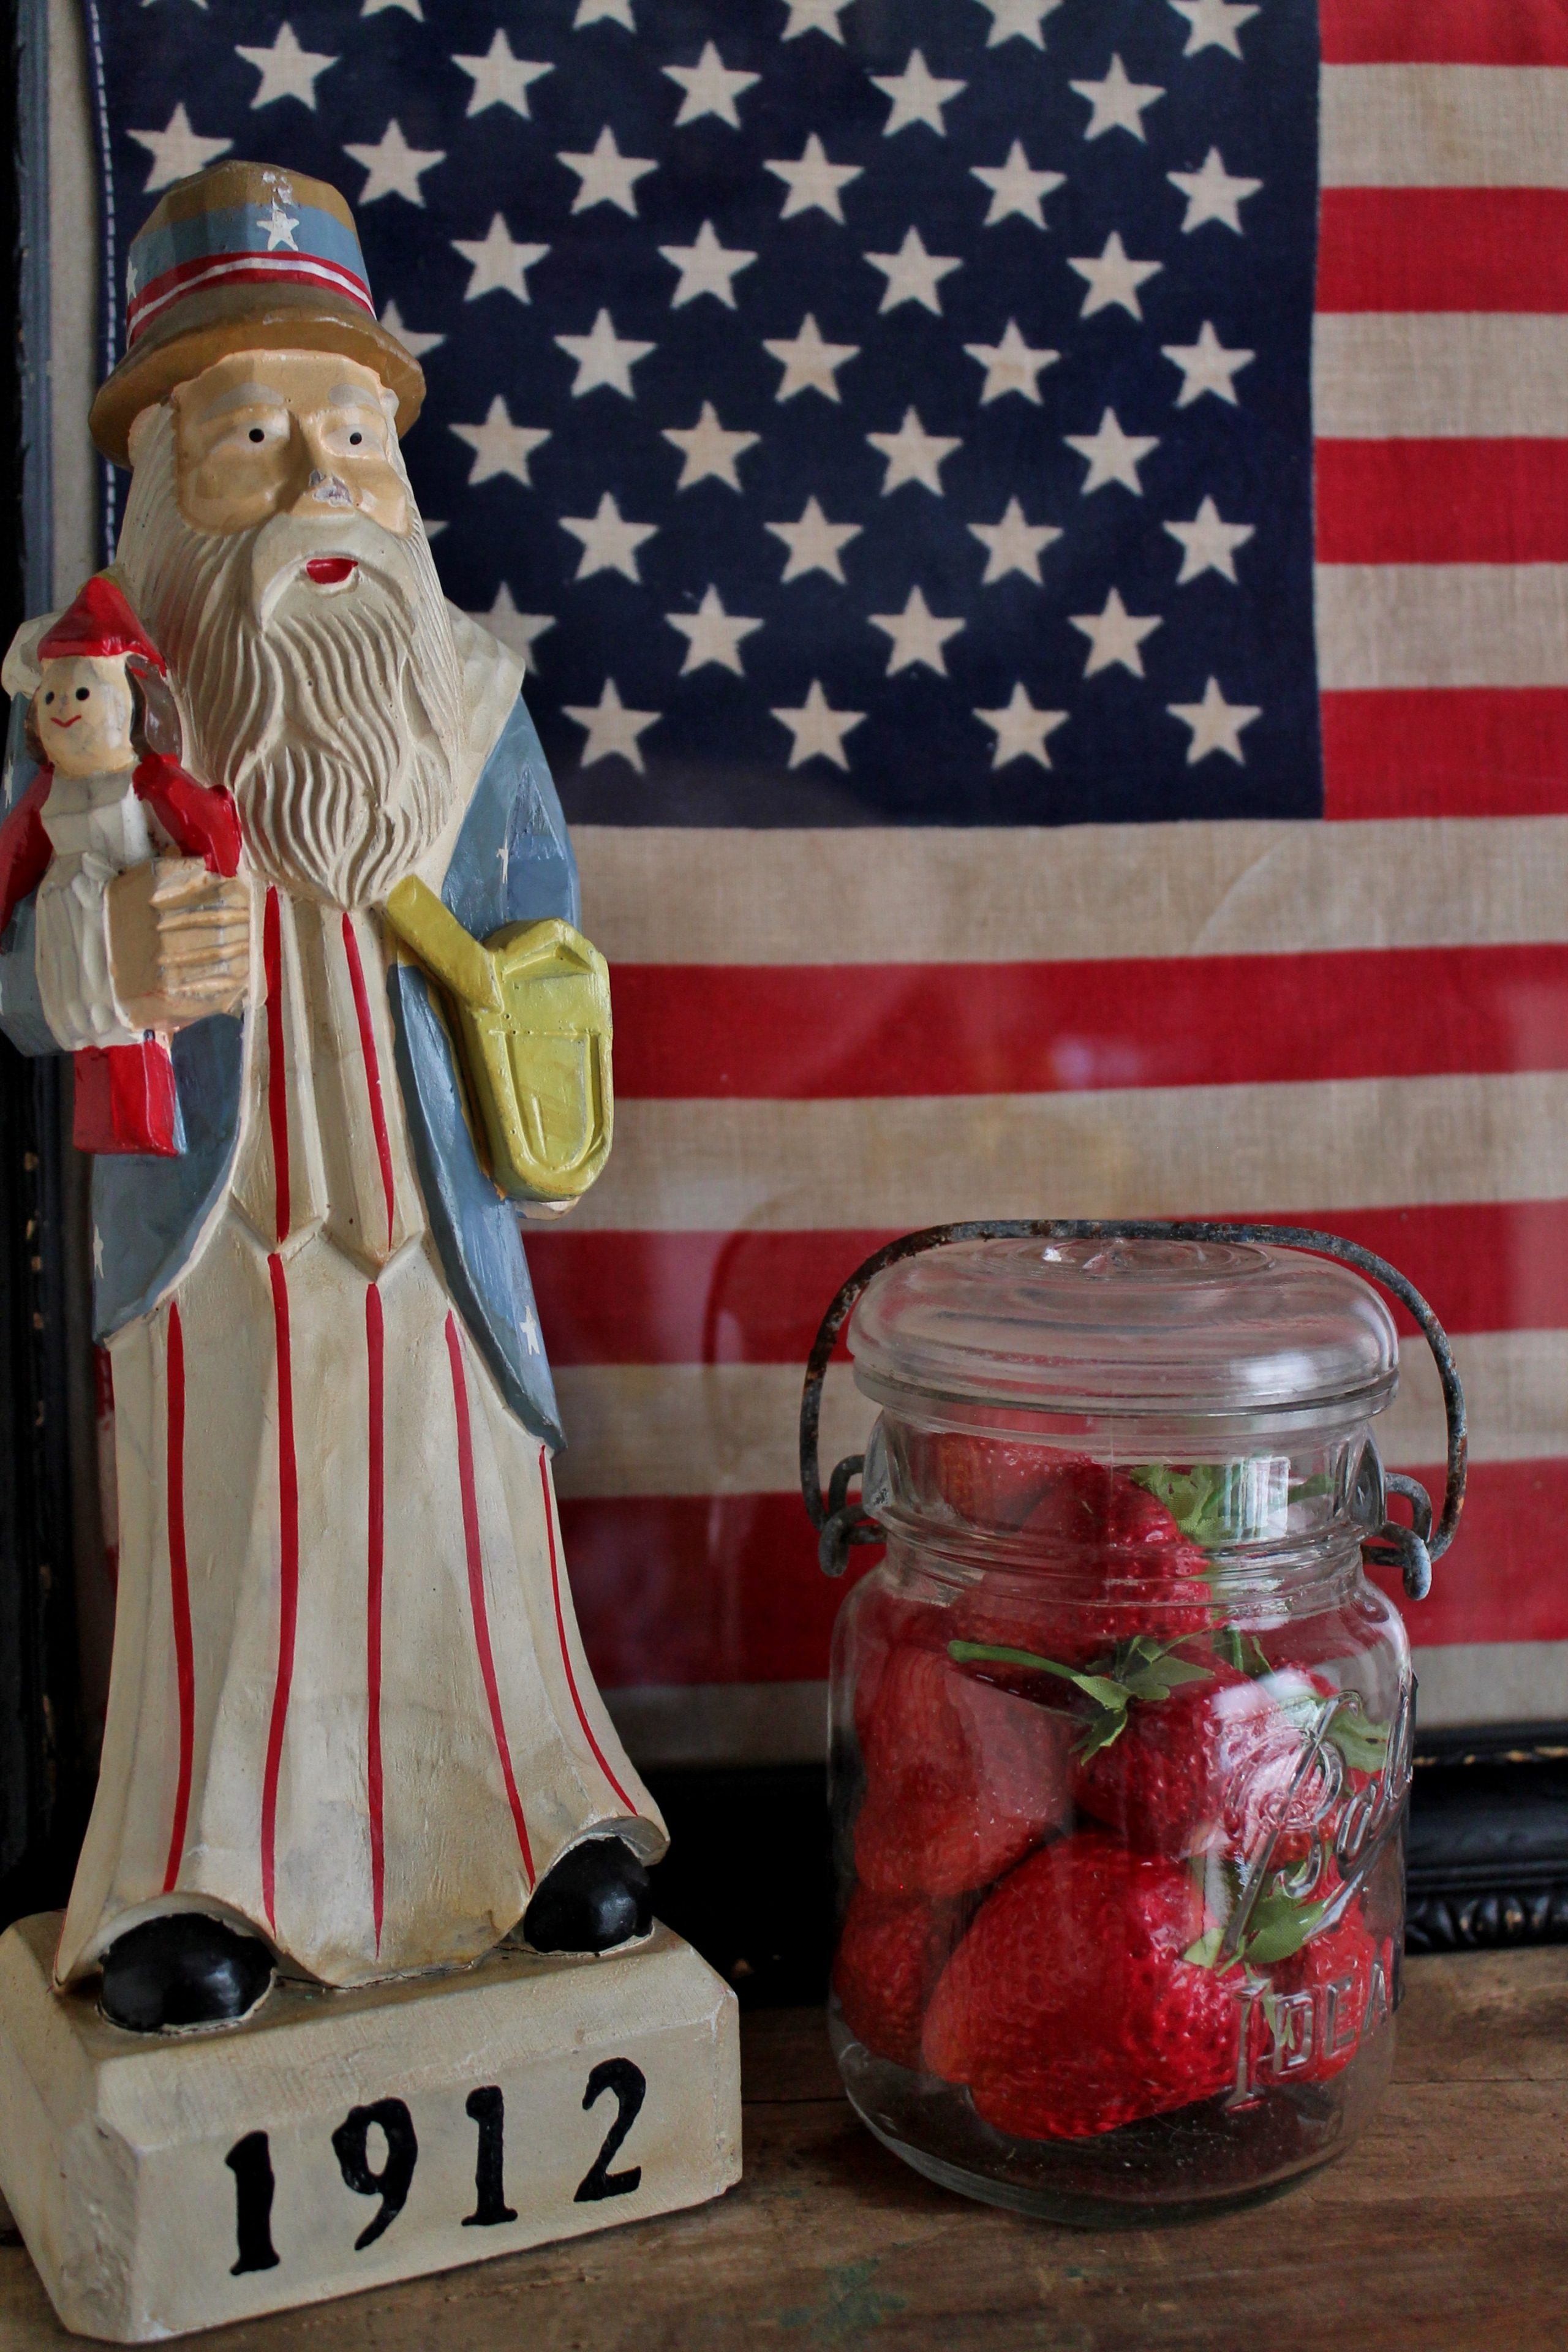 uncle-sam-and-strawberries-with-framed-vintage-flag